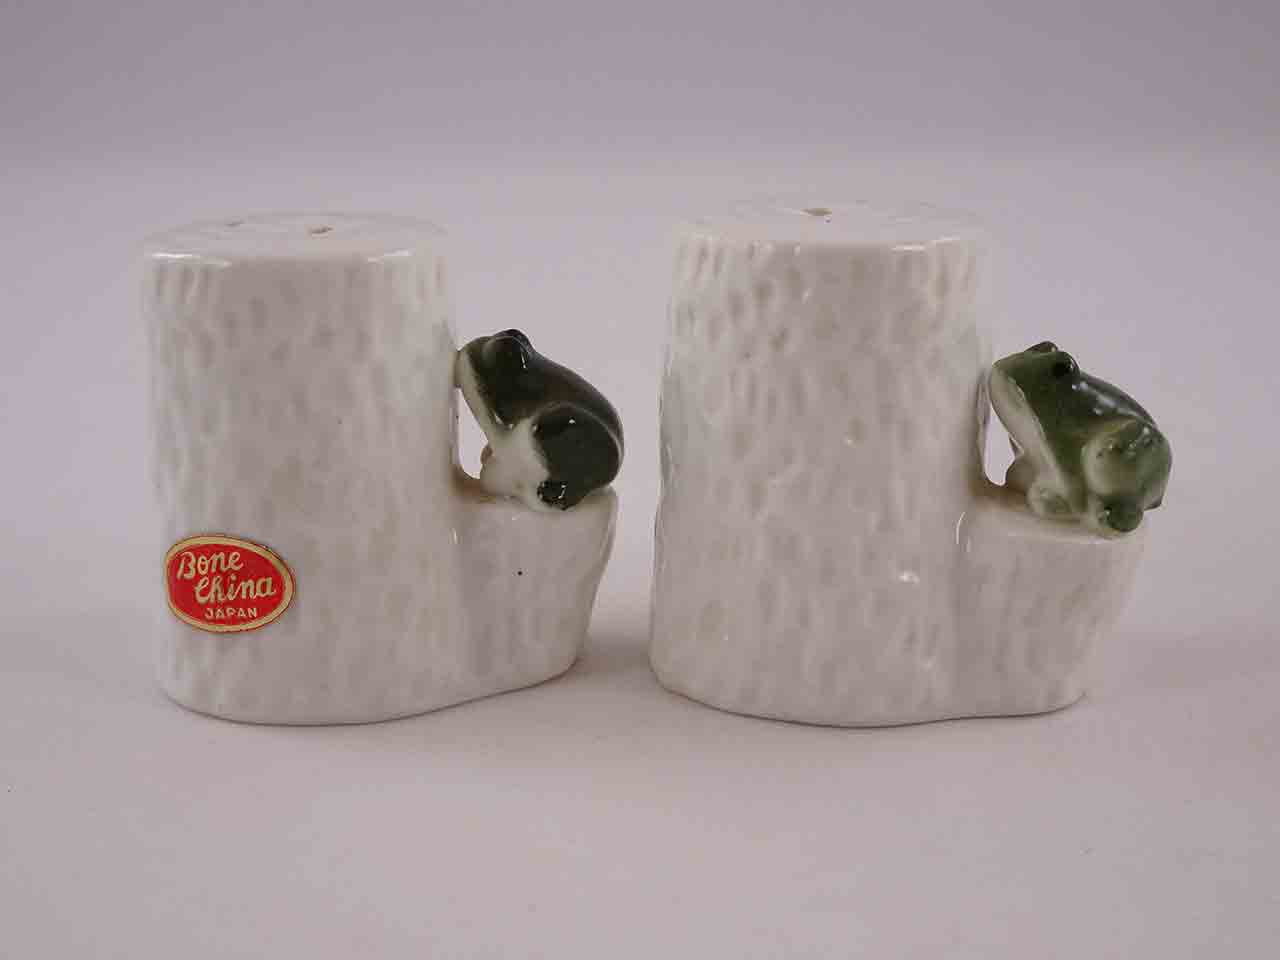 Bone China animals by white tree stumps salt and pepper shakers - frogs